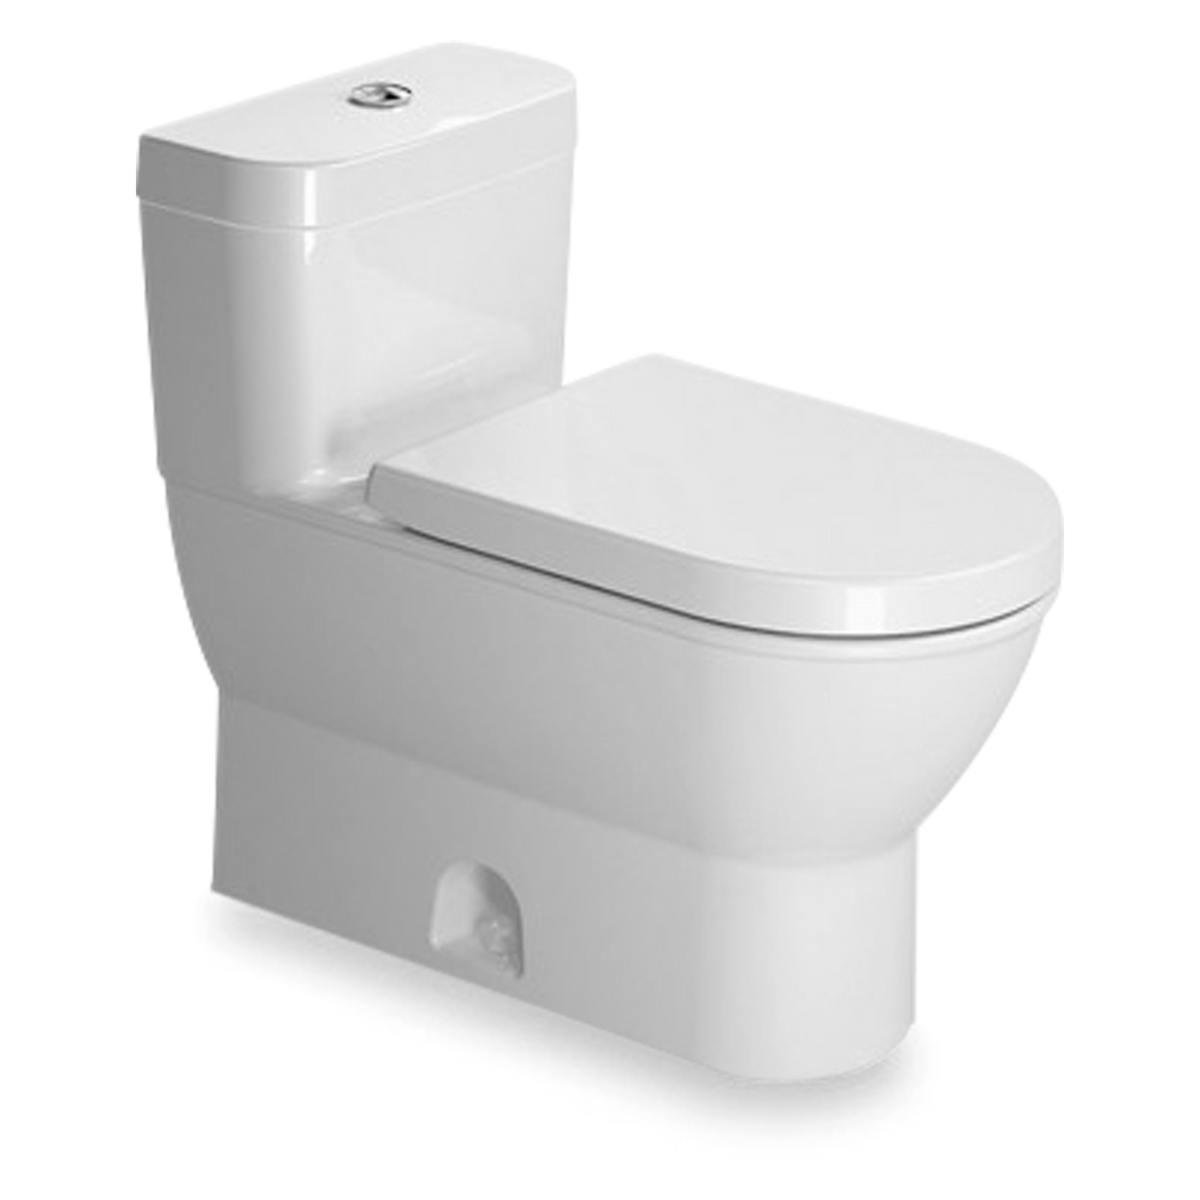 Duravit Darling 1 Piece Without Seat - White